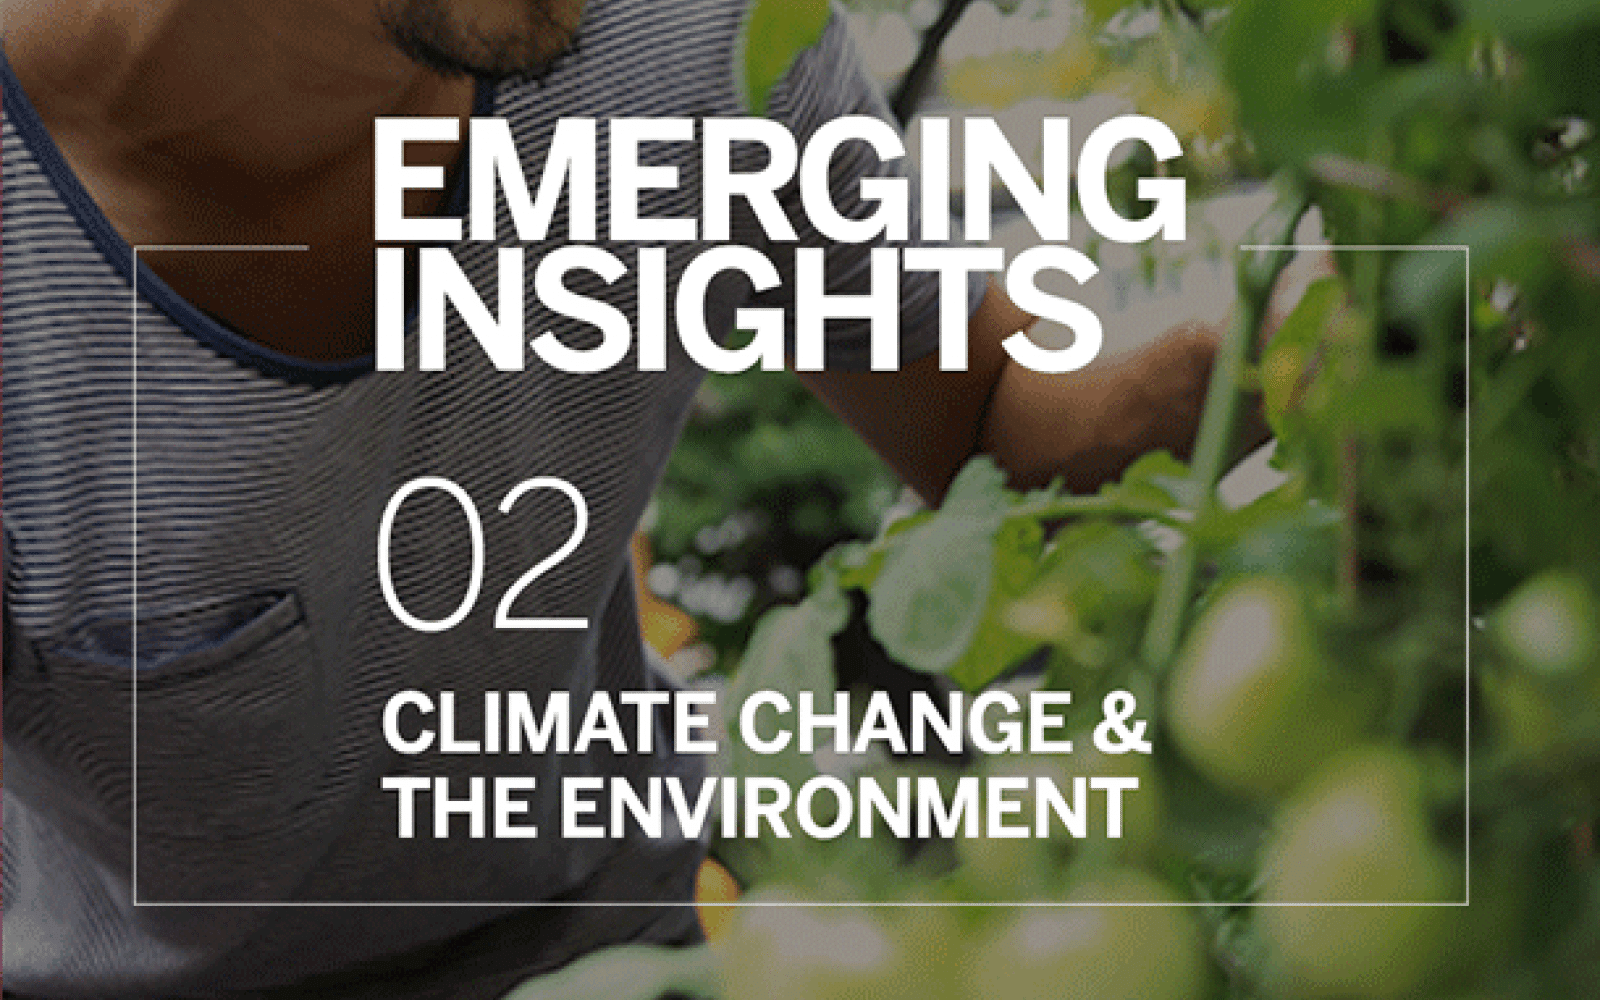 Na tle zielonego krzaku napis "Emerging insights. 02 - Climate change and the environment".